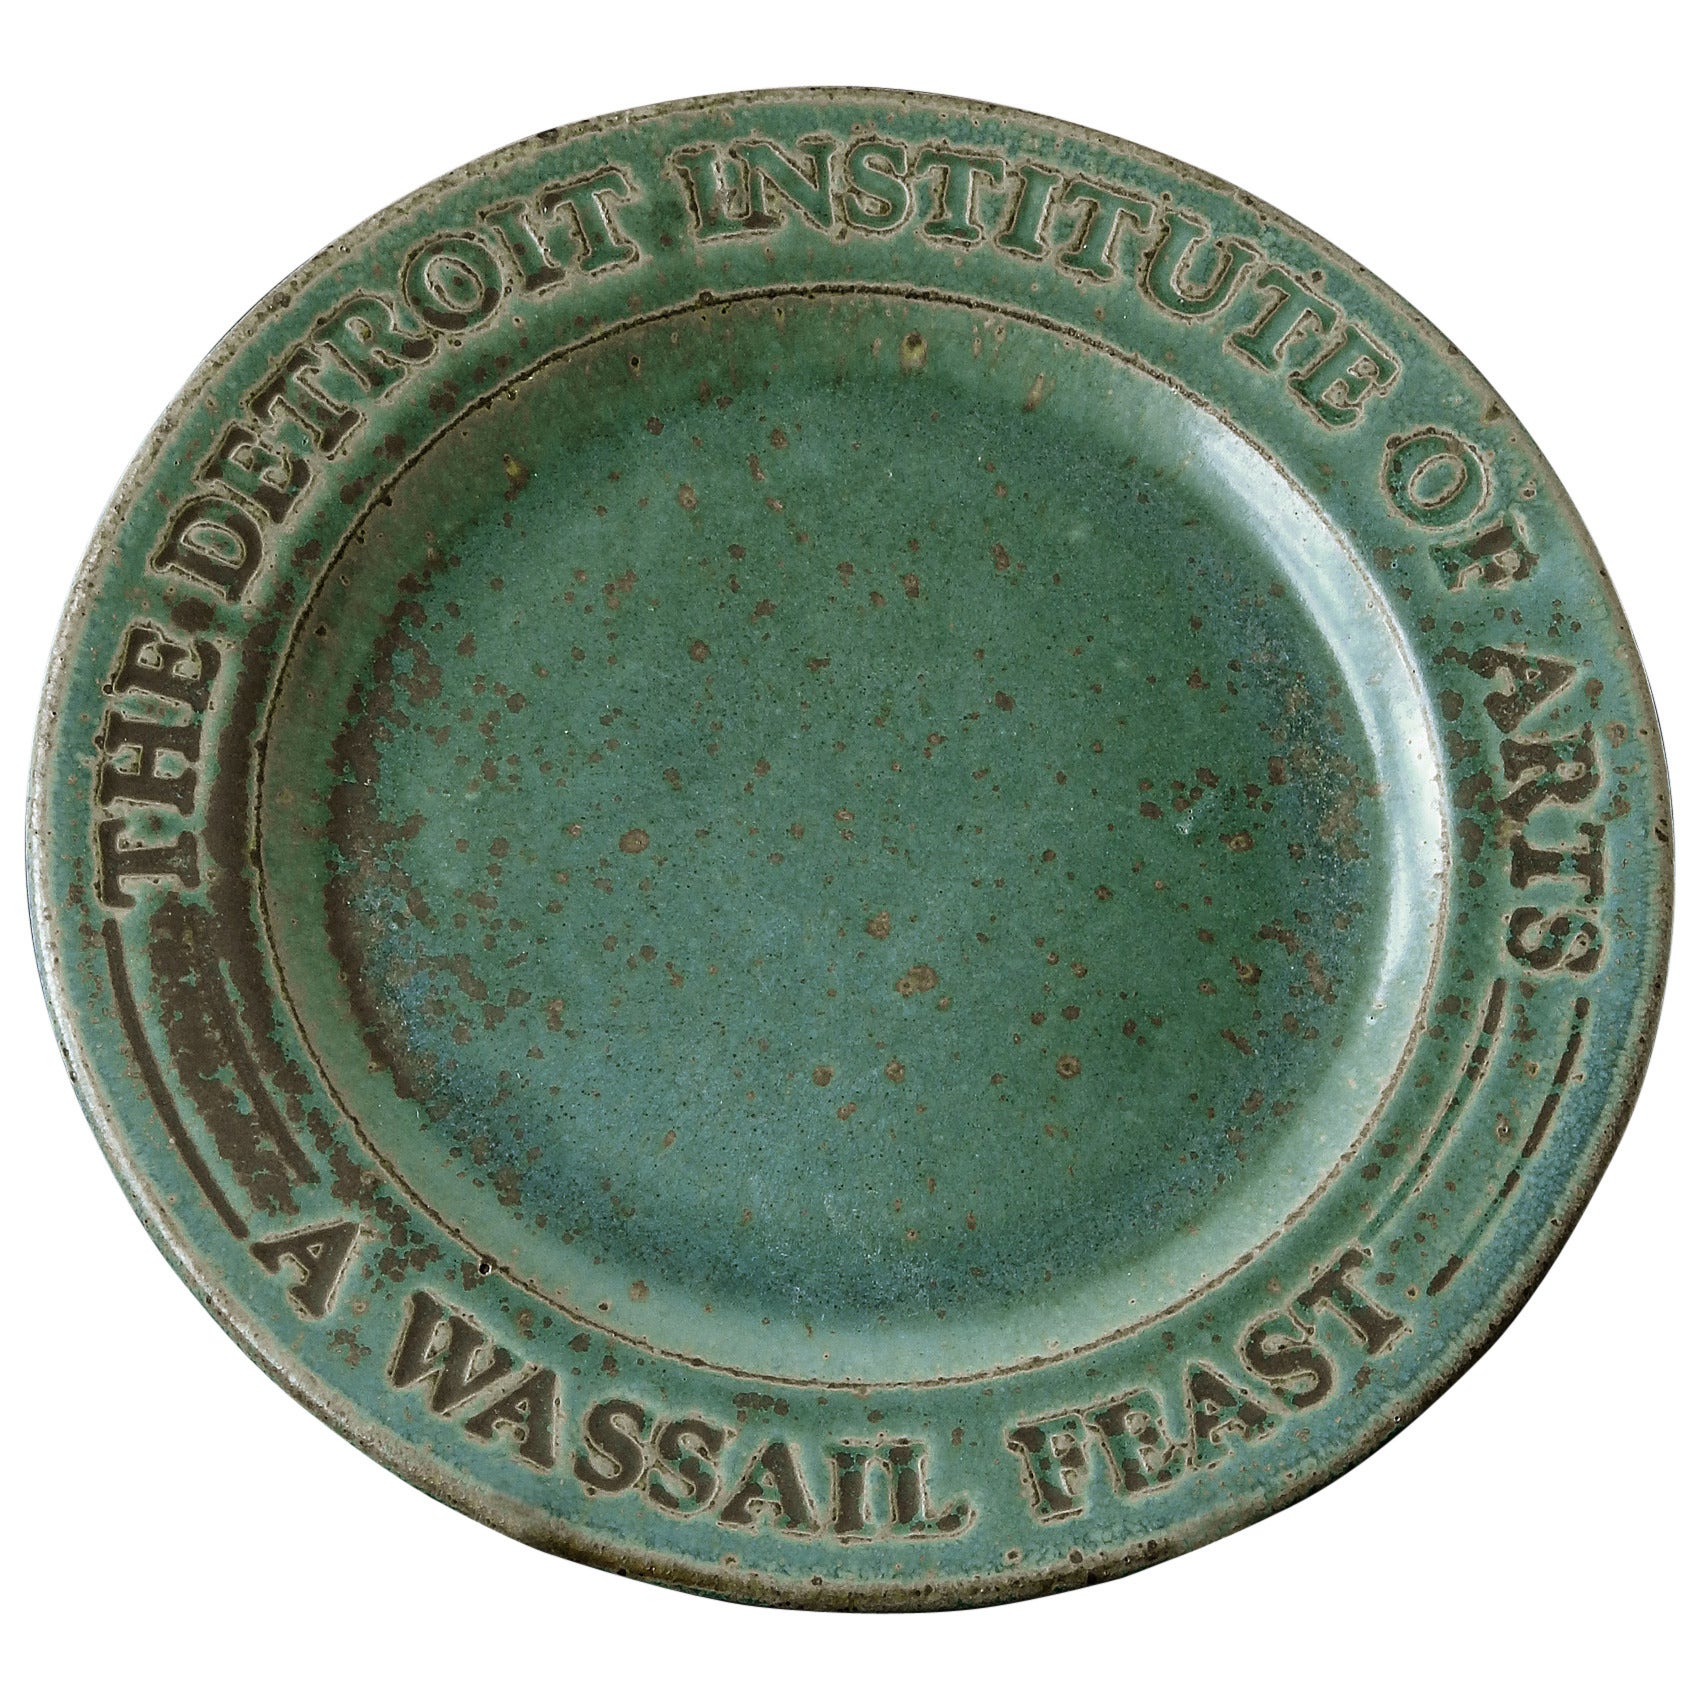 "Wassail Feast" Charger by Pewabic for Detroit Institute of Arts, 1982